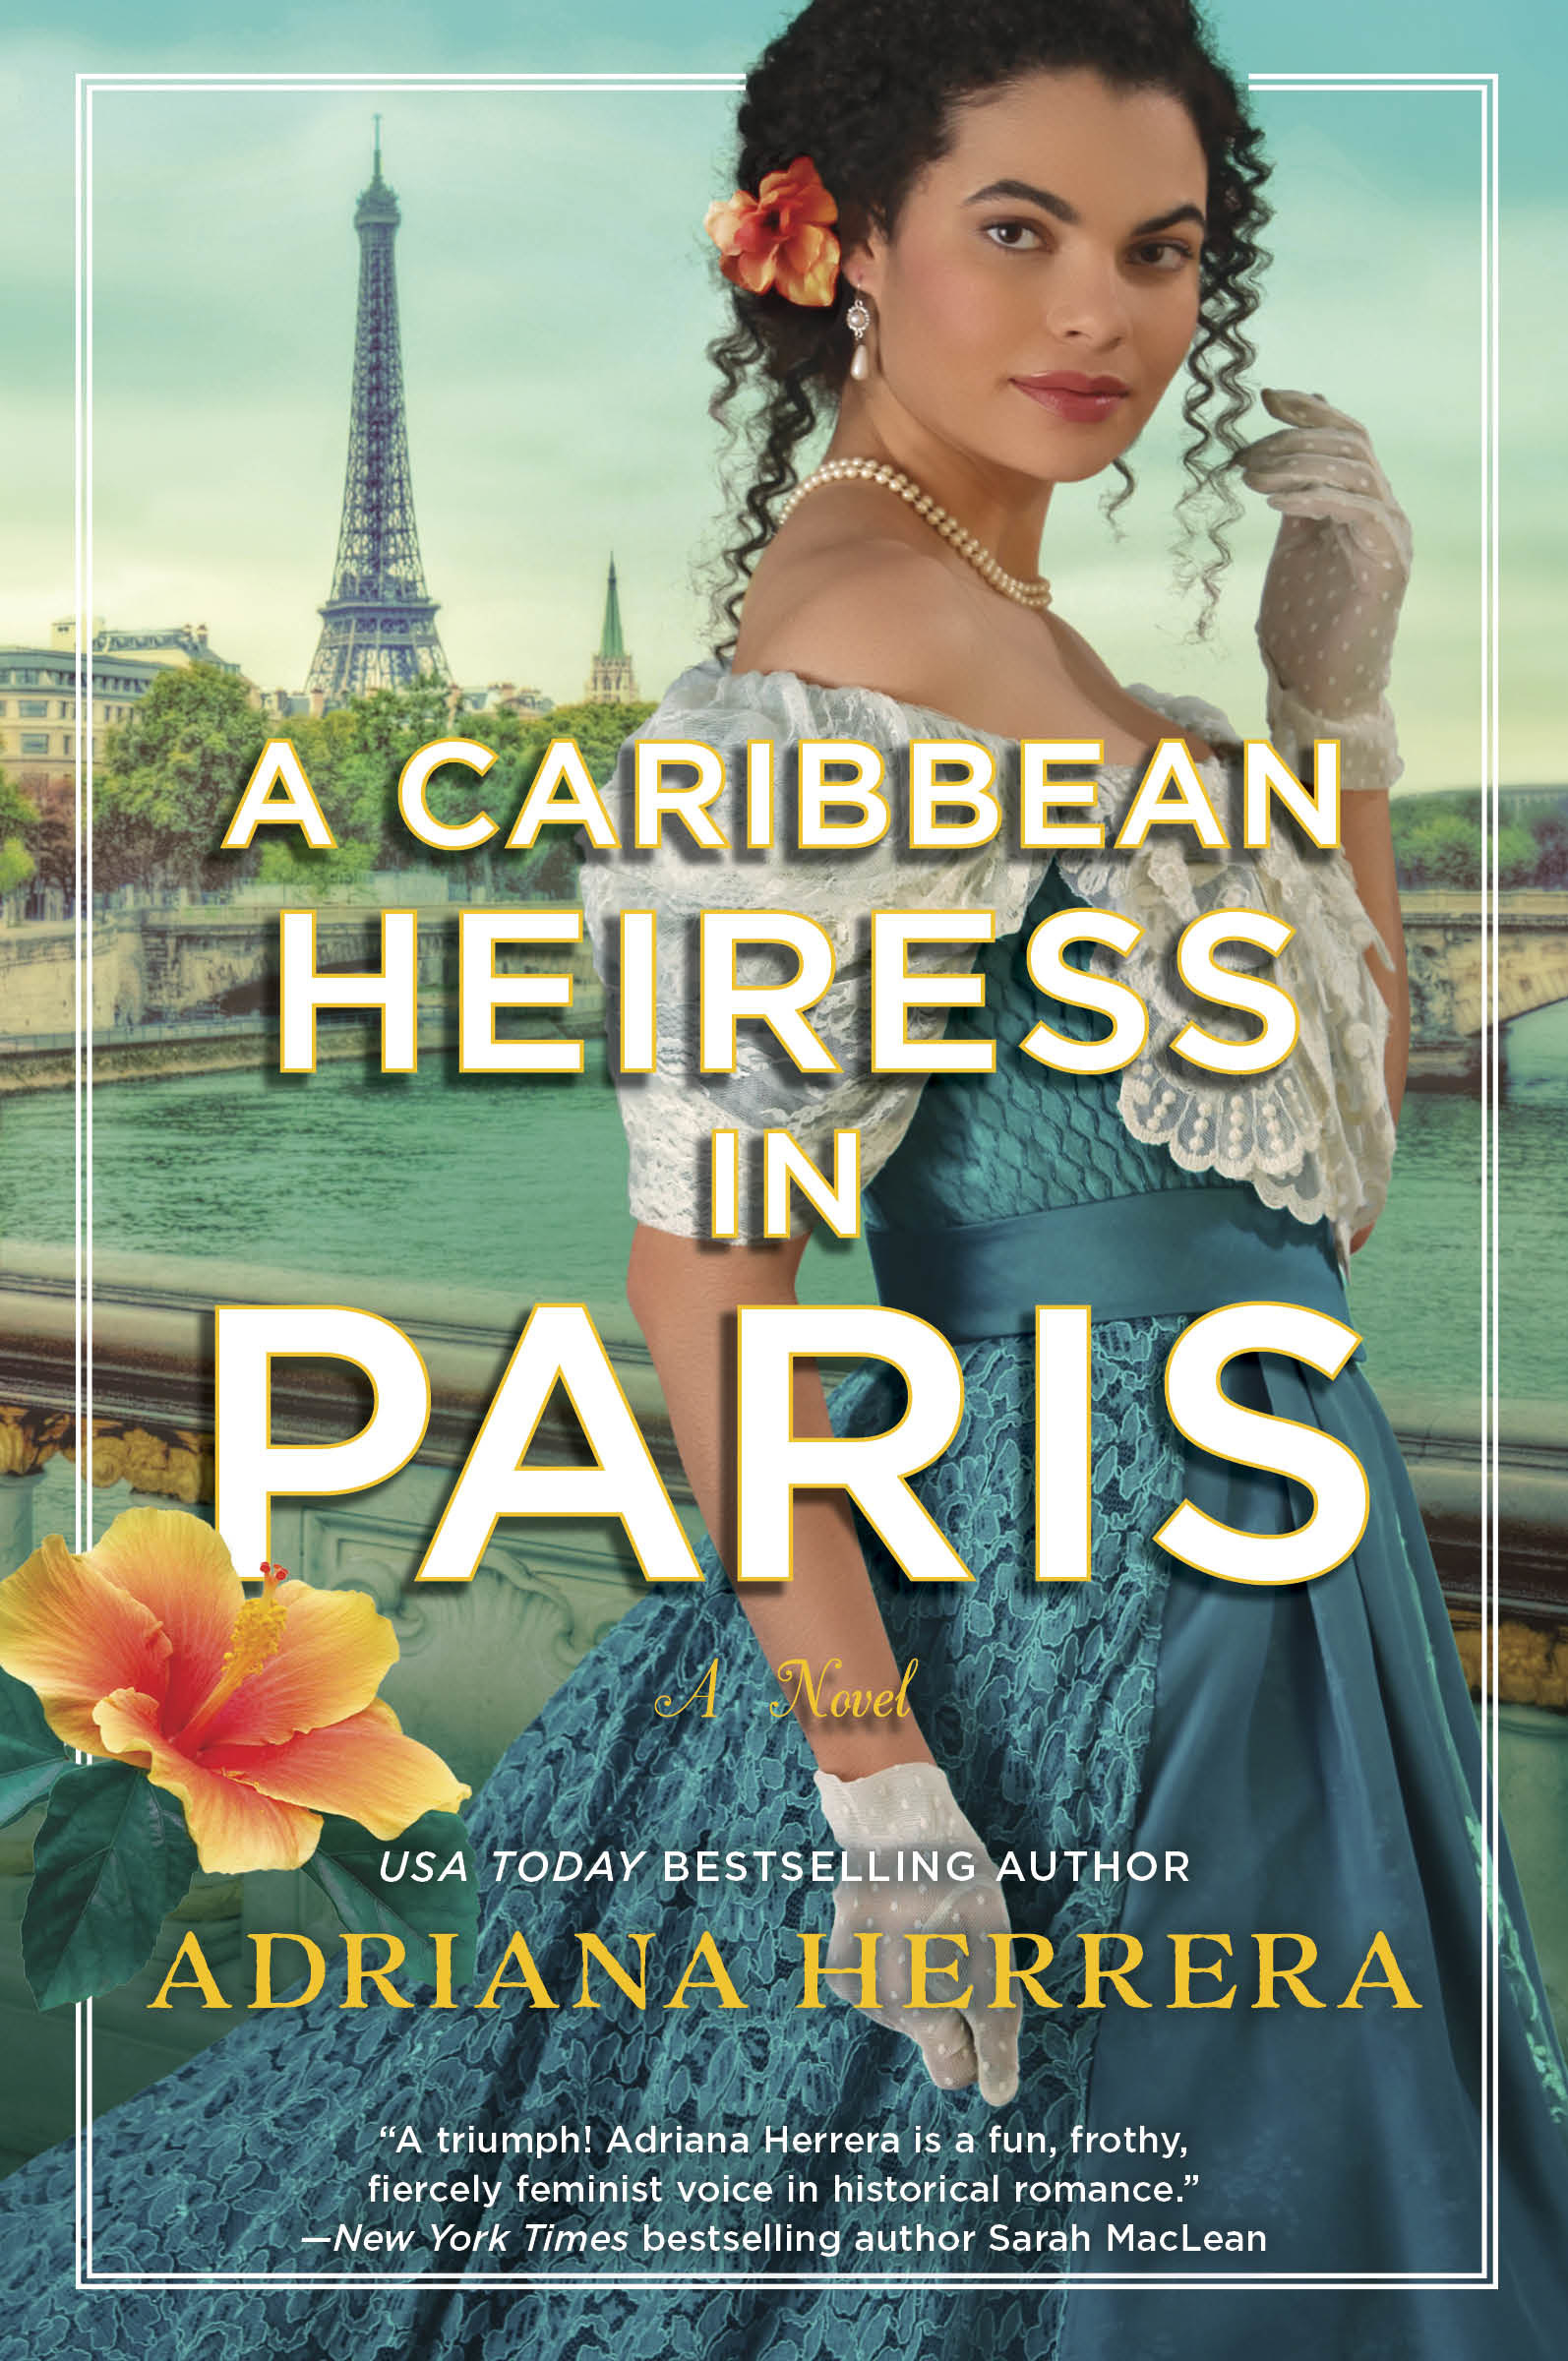 &quot;A Caribbean Heiress in Paris&quot; cover showing a woman in a fancy gown in front of a city view of Paris